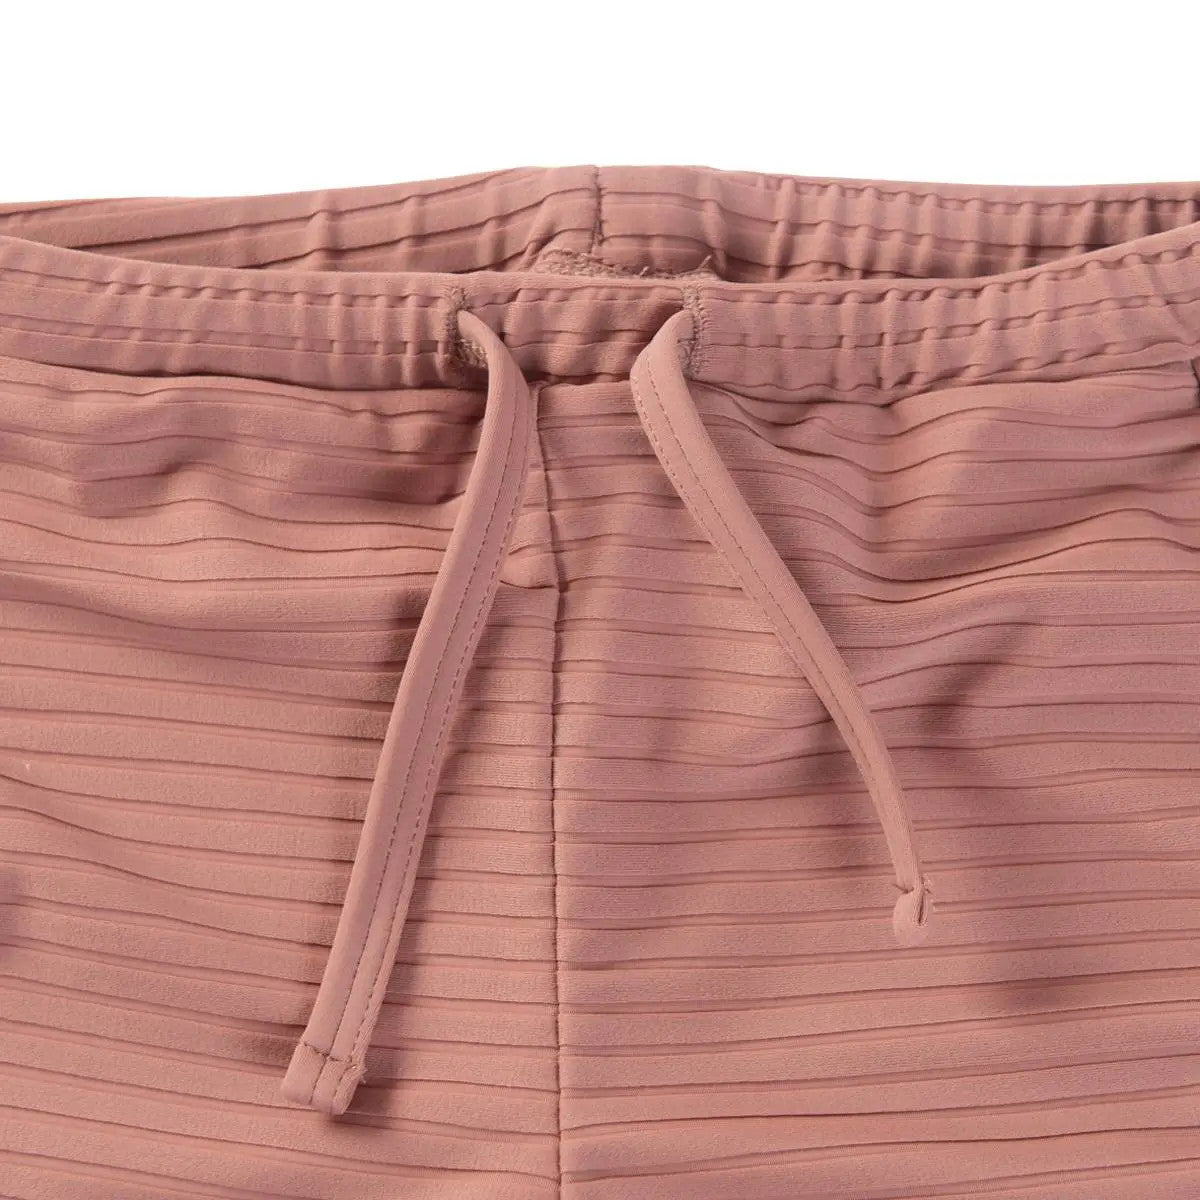 Little Hedonist unisex swim shorts made of recycled polyamide, in Burlwood Pink